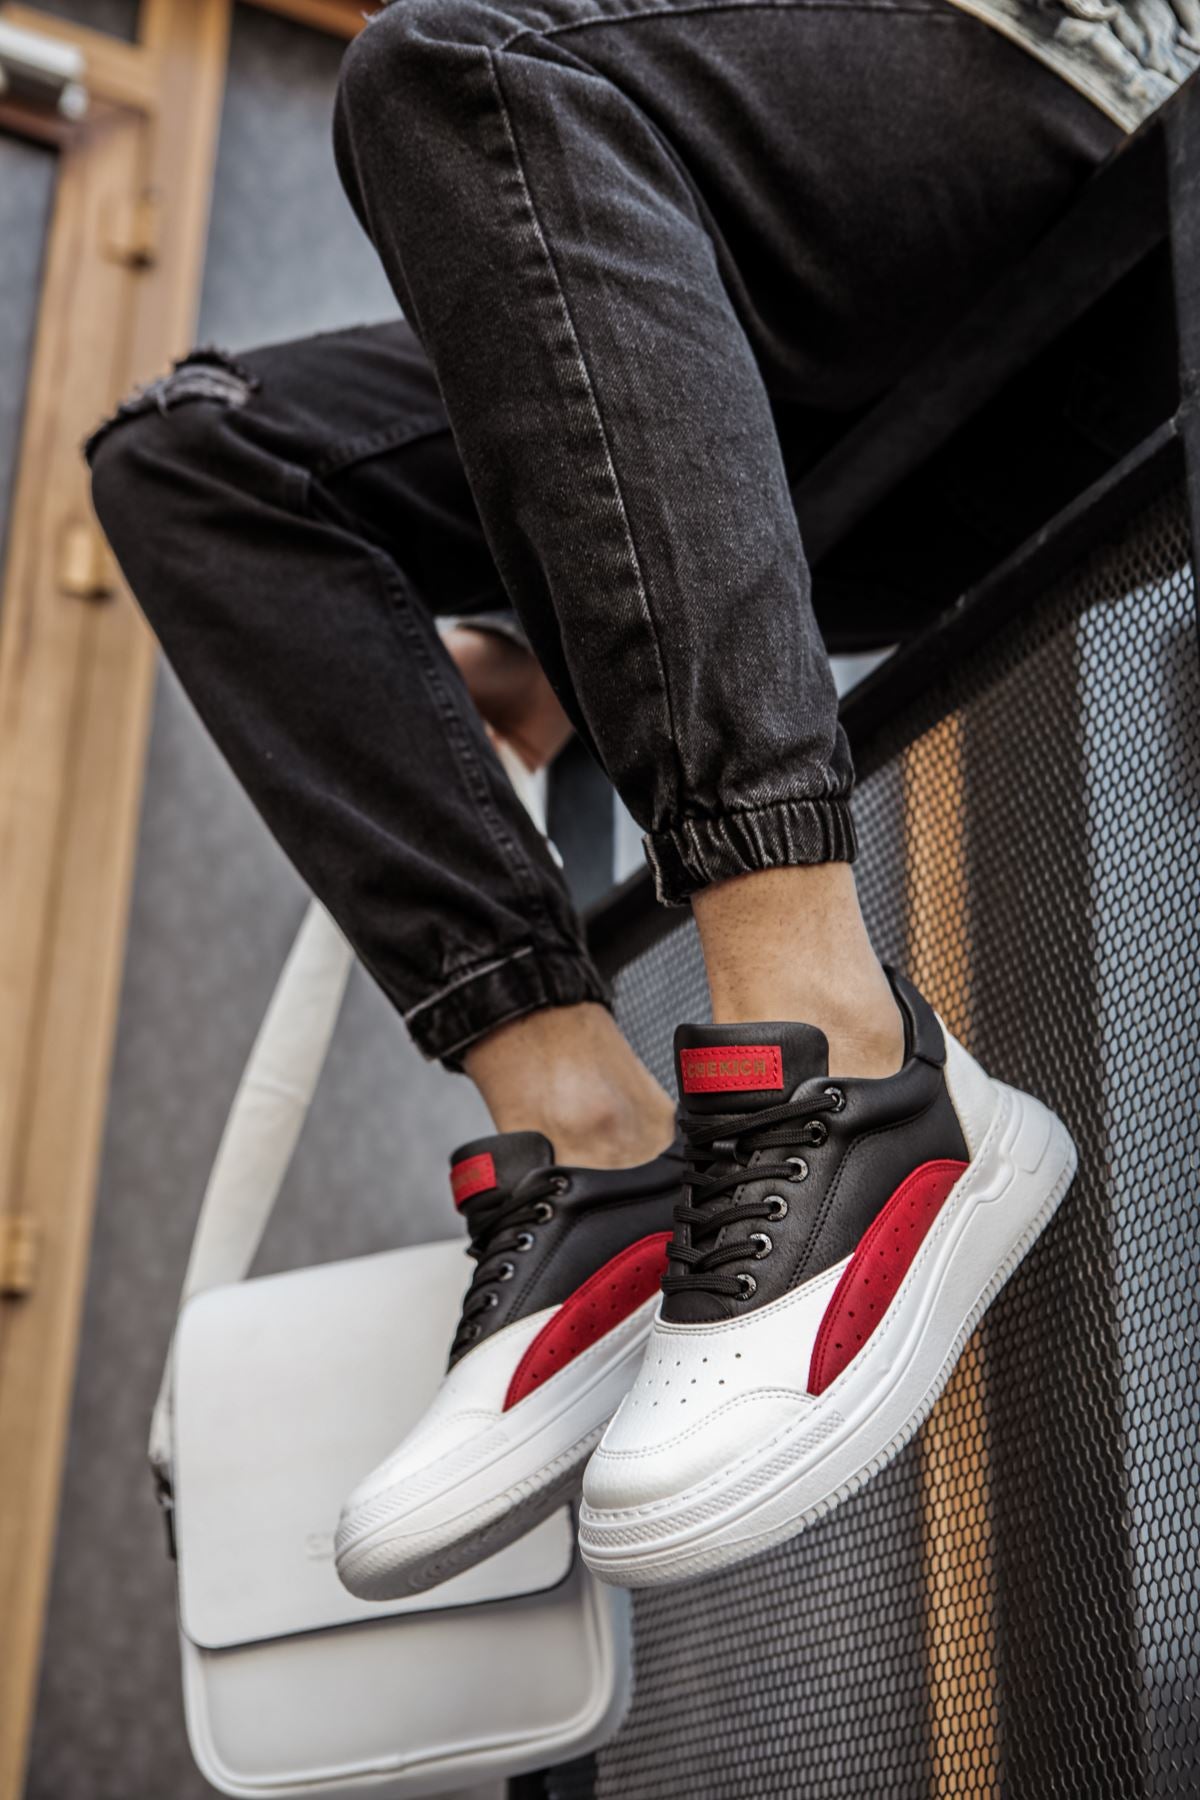 CH115 WS Men's Shoes WHITE / RED / BLACK - STREETMODE ™